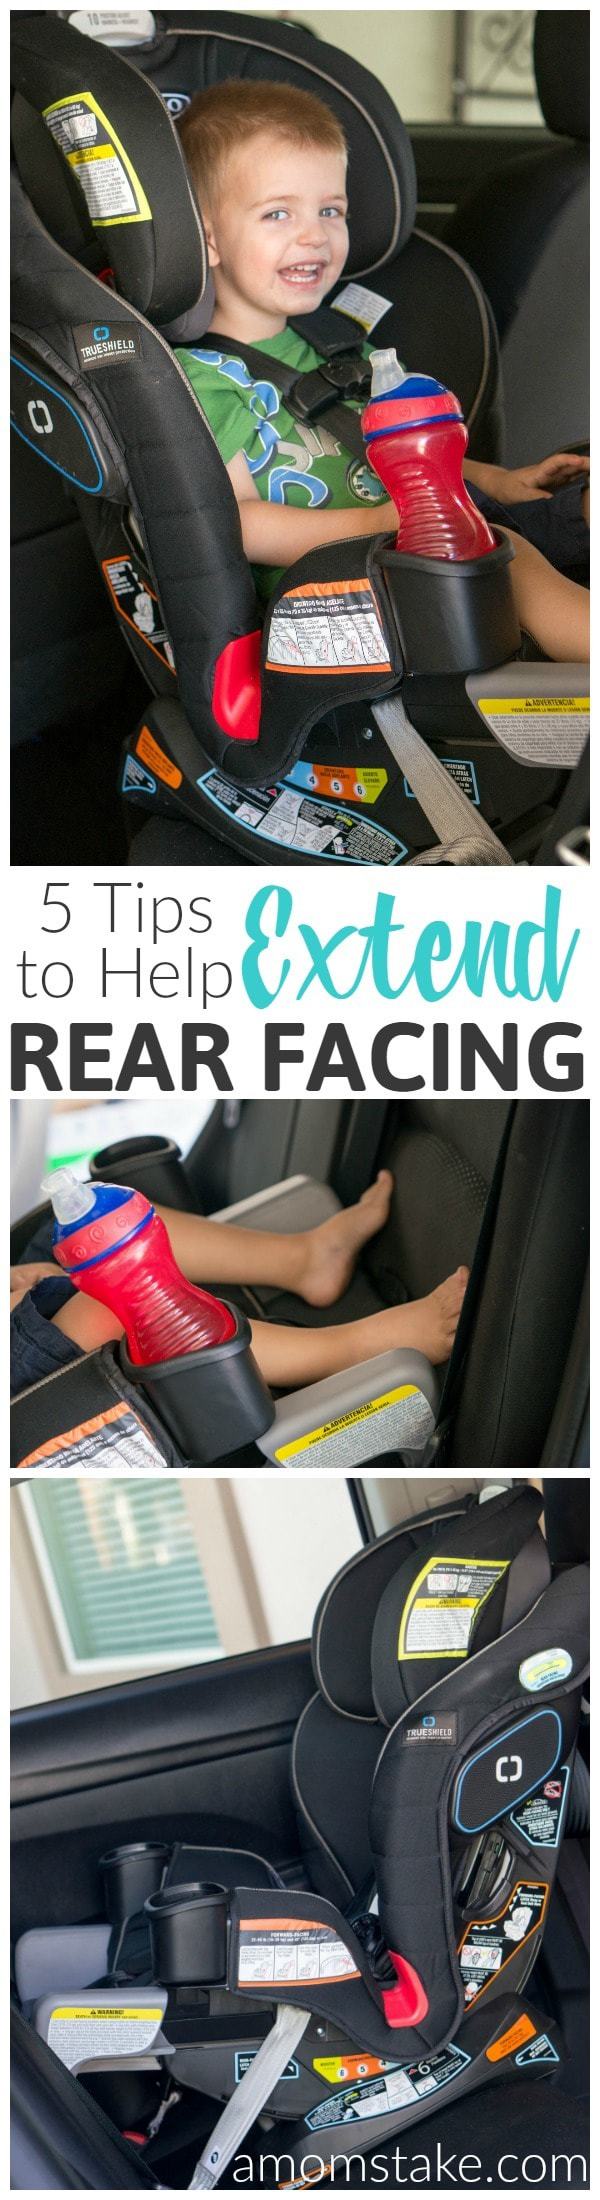 5 Tips to Help Parents Extend Rear-Facing #GenerationGraco ...